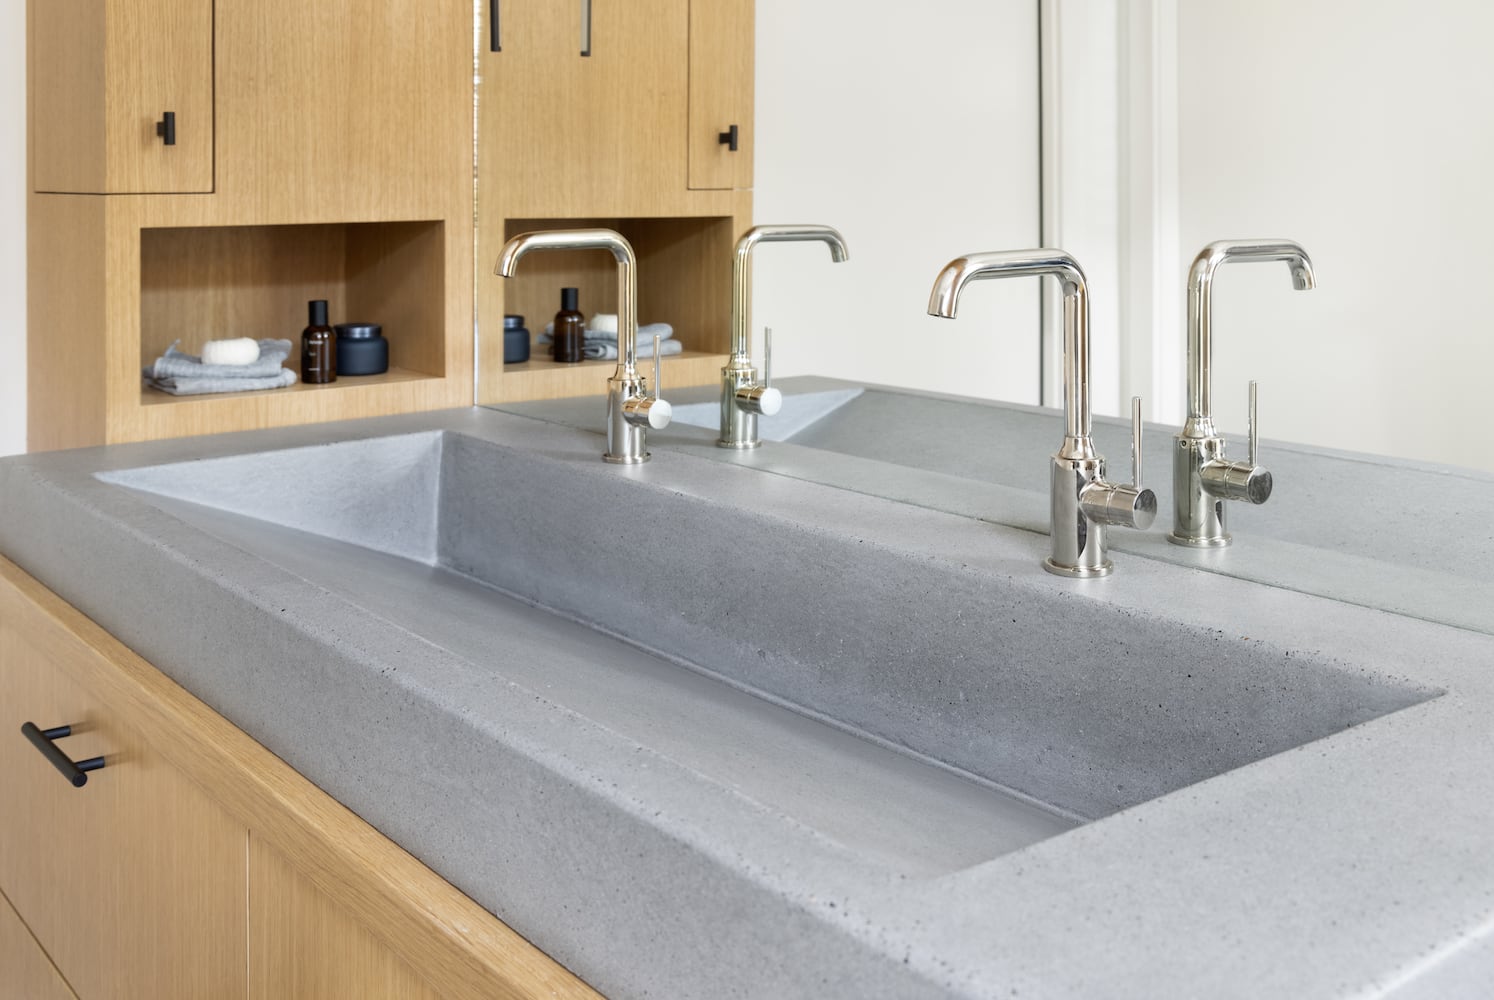 Detail of Cement Elegance concrete ramp sink with Crosswater London lavatory faucets